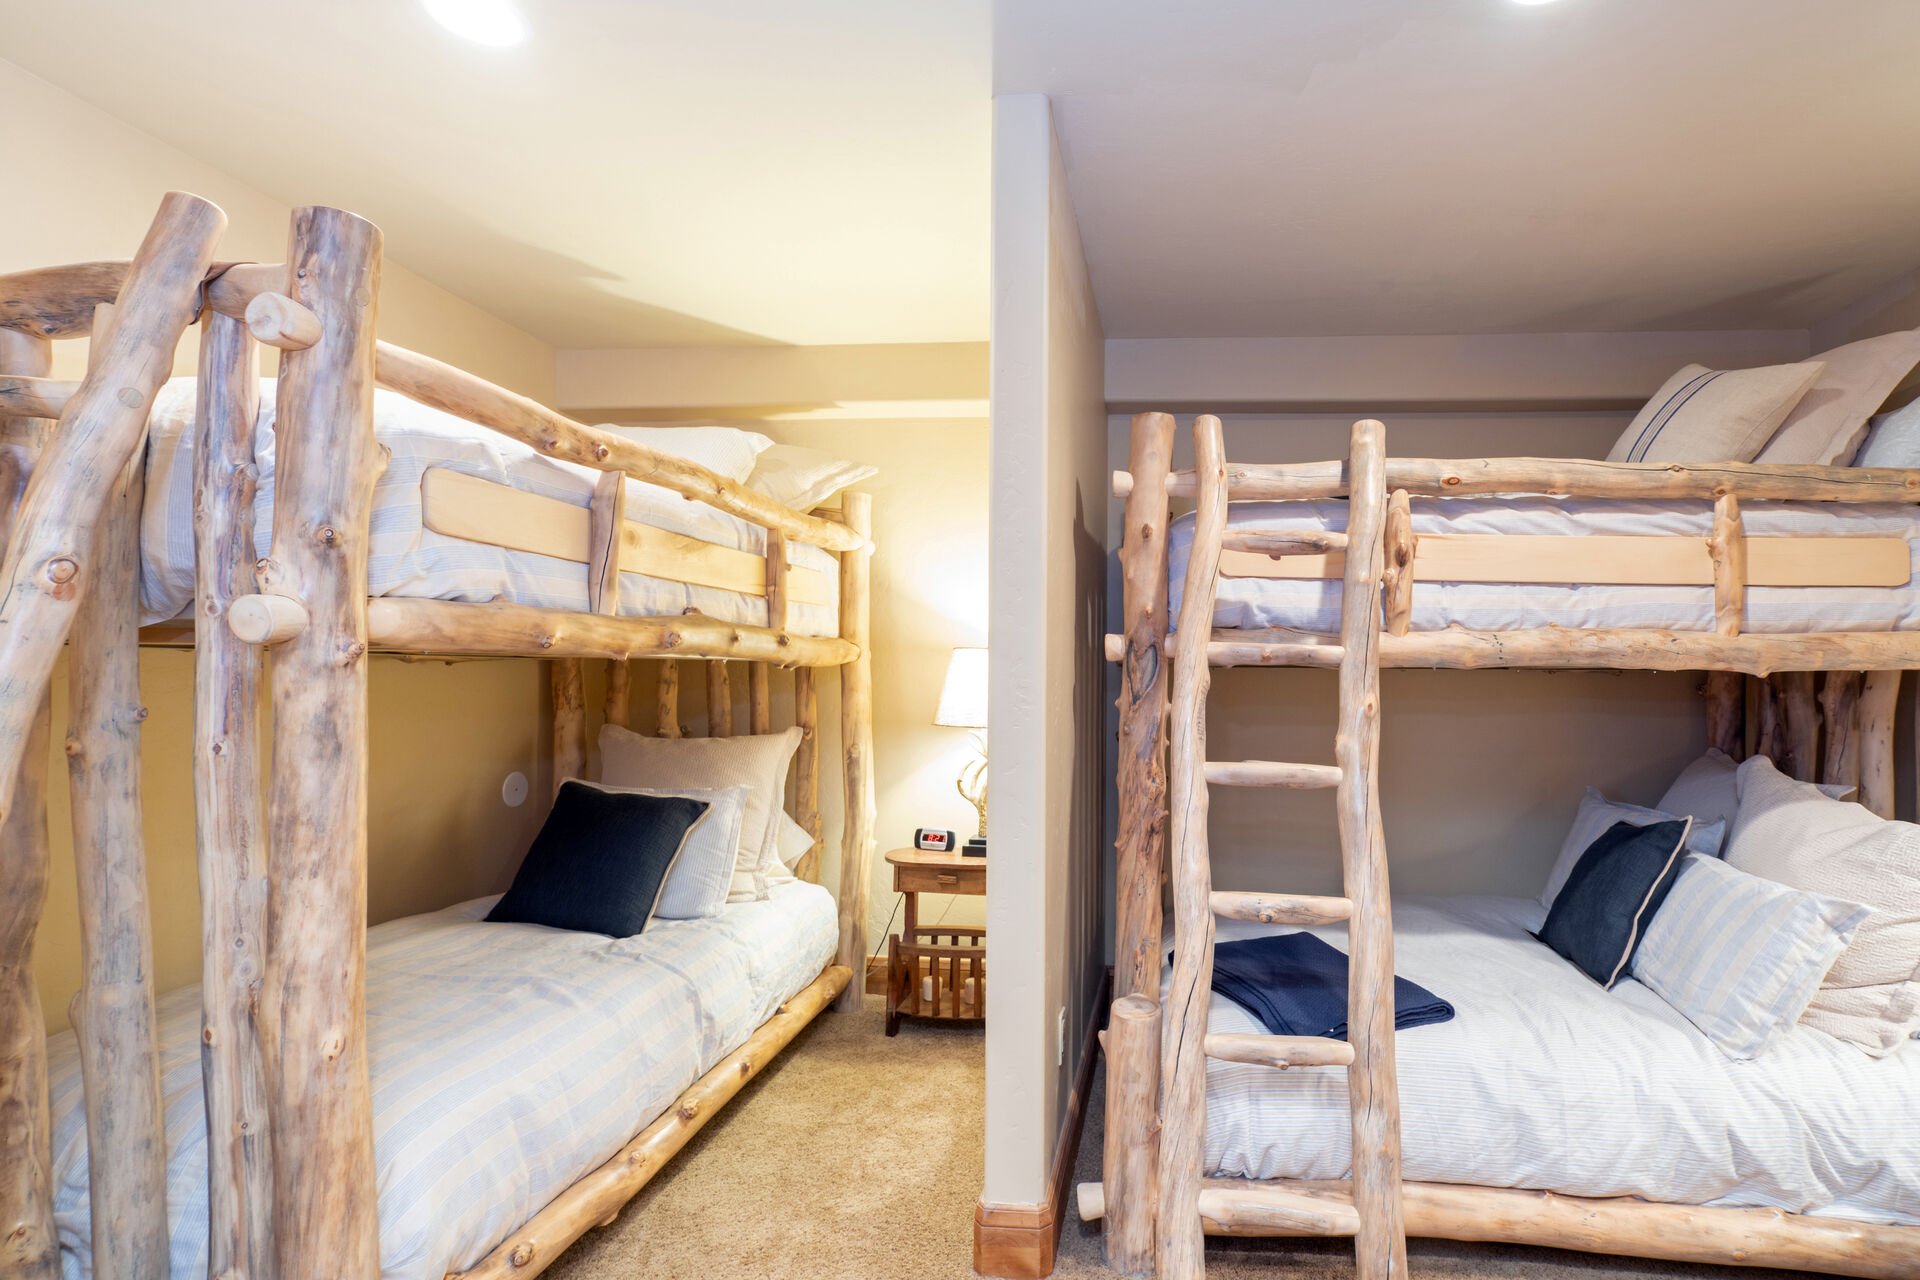 Two sets of bunk beds in a side bedroom.